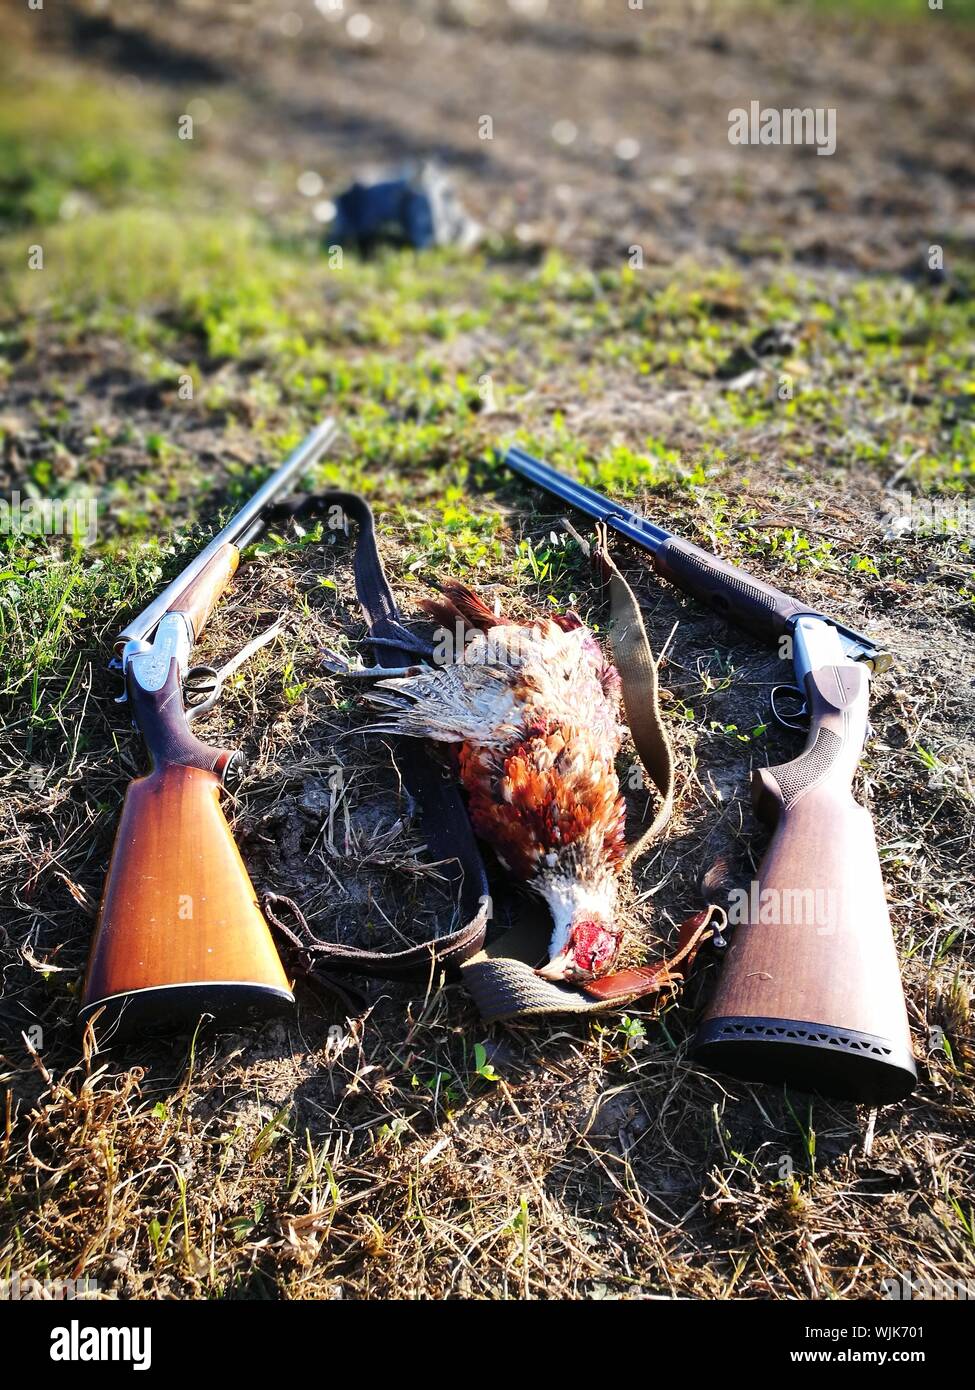 High Angle View Of Dead Gamebird Amidst Rifles On Field Stock Photo